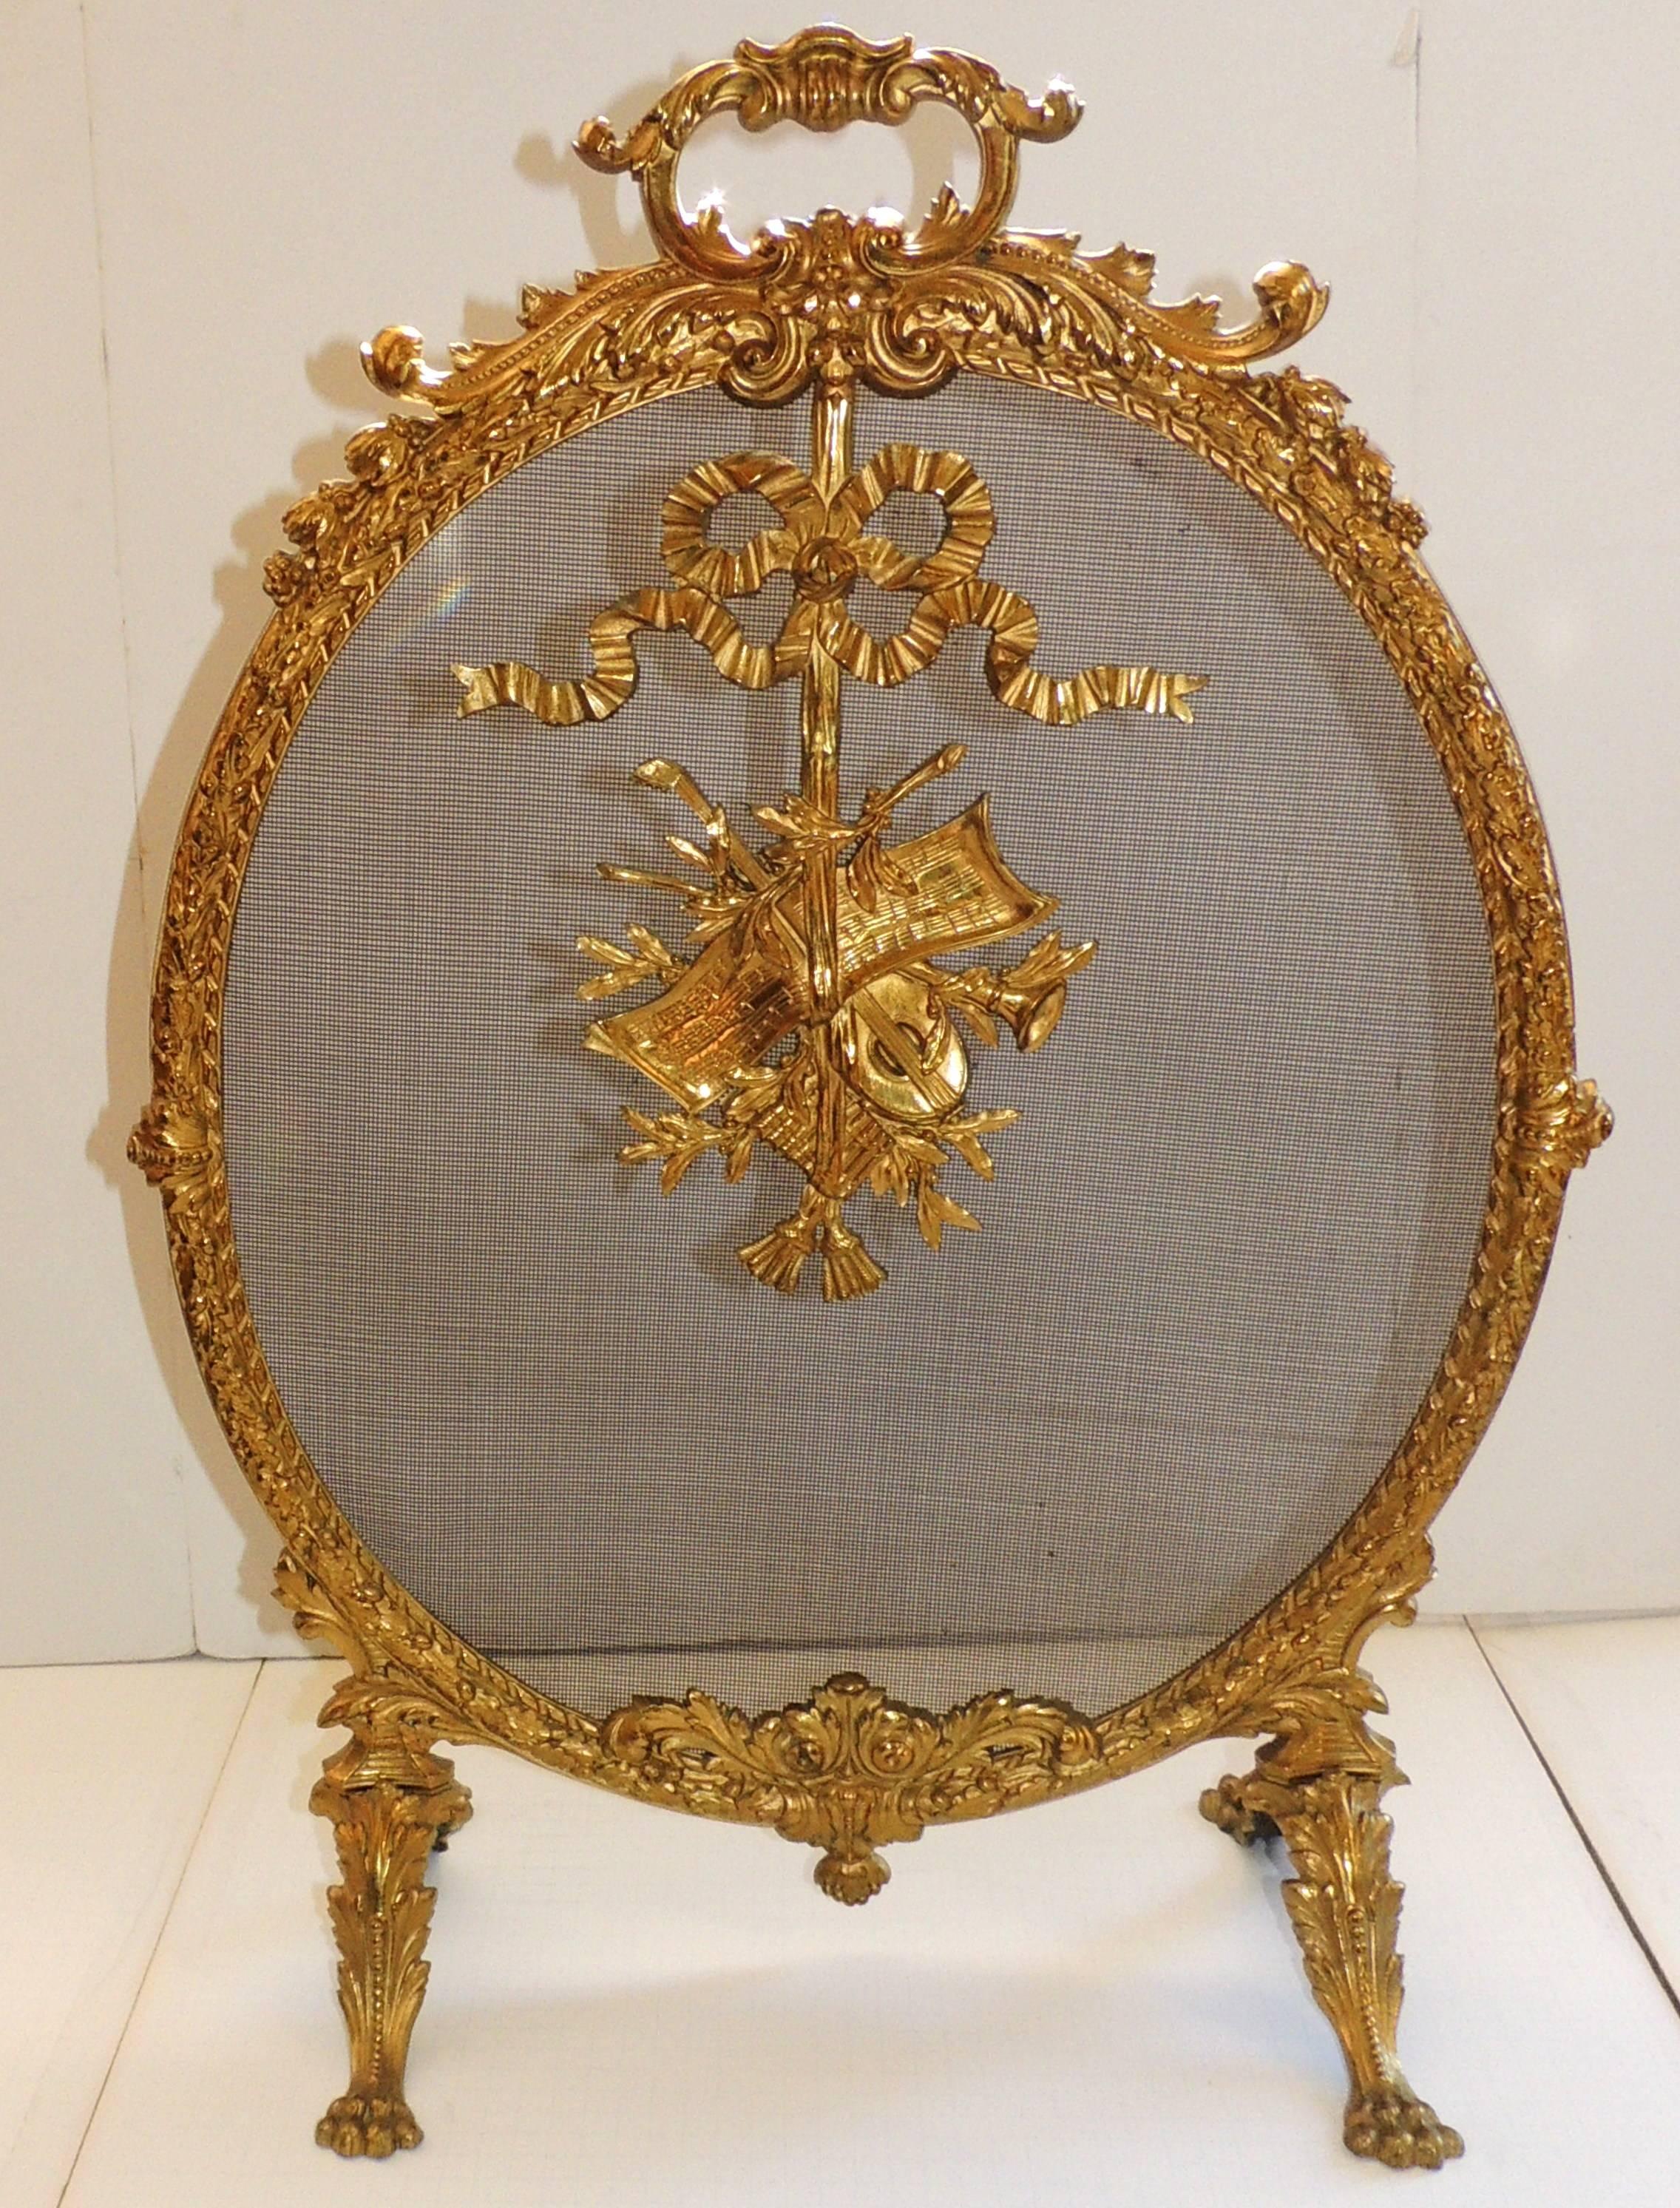 French Doré Bronze Oval Ormolu-Mounted Basket Bows Instruments Fireplace Screen 1